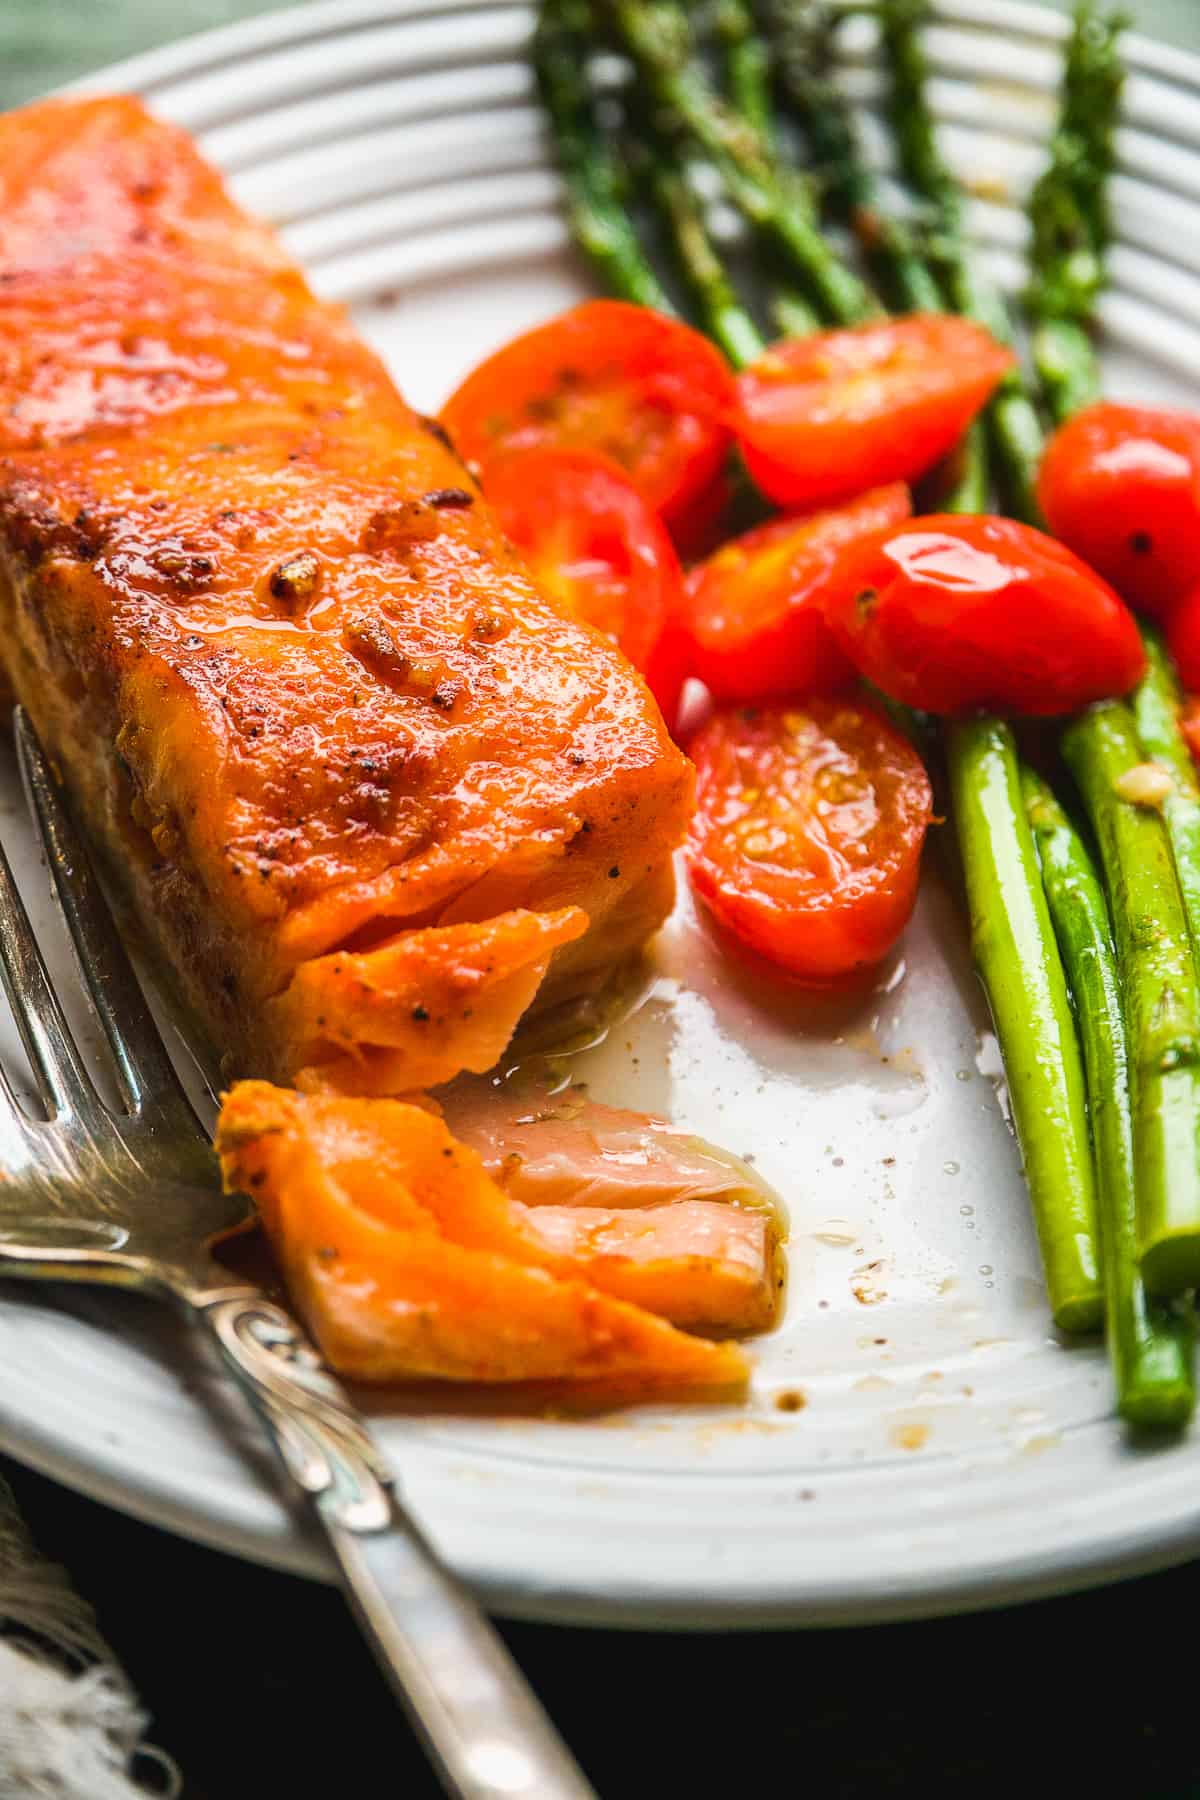 Salmon filet on a plate with a fork.